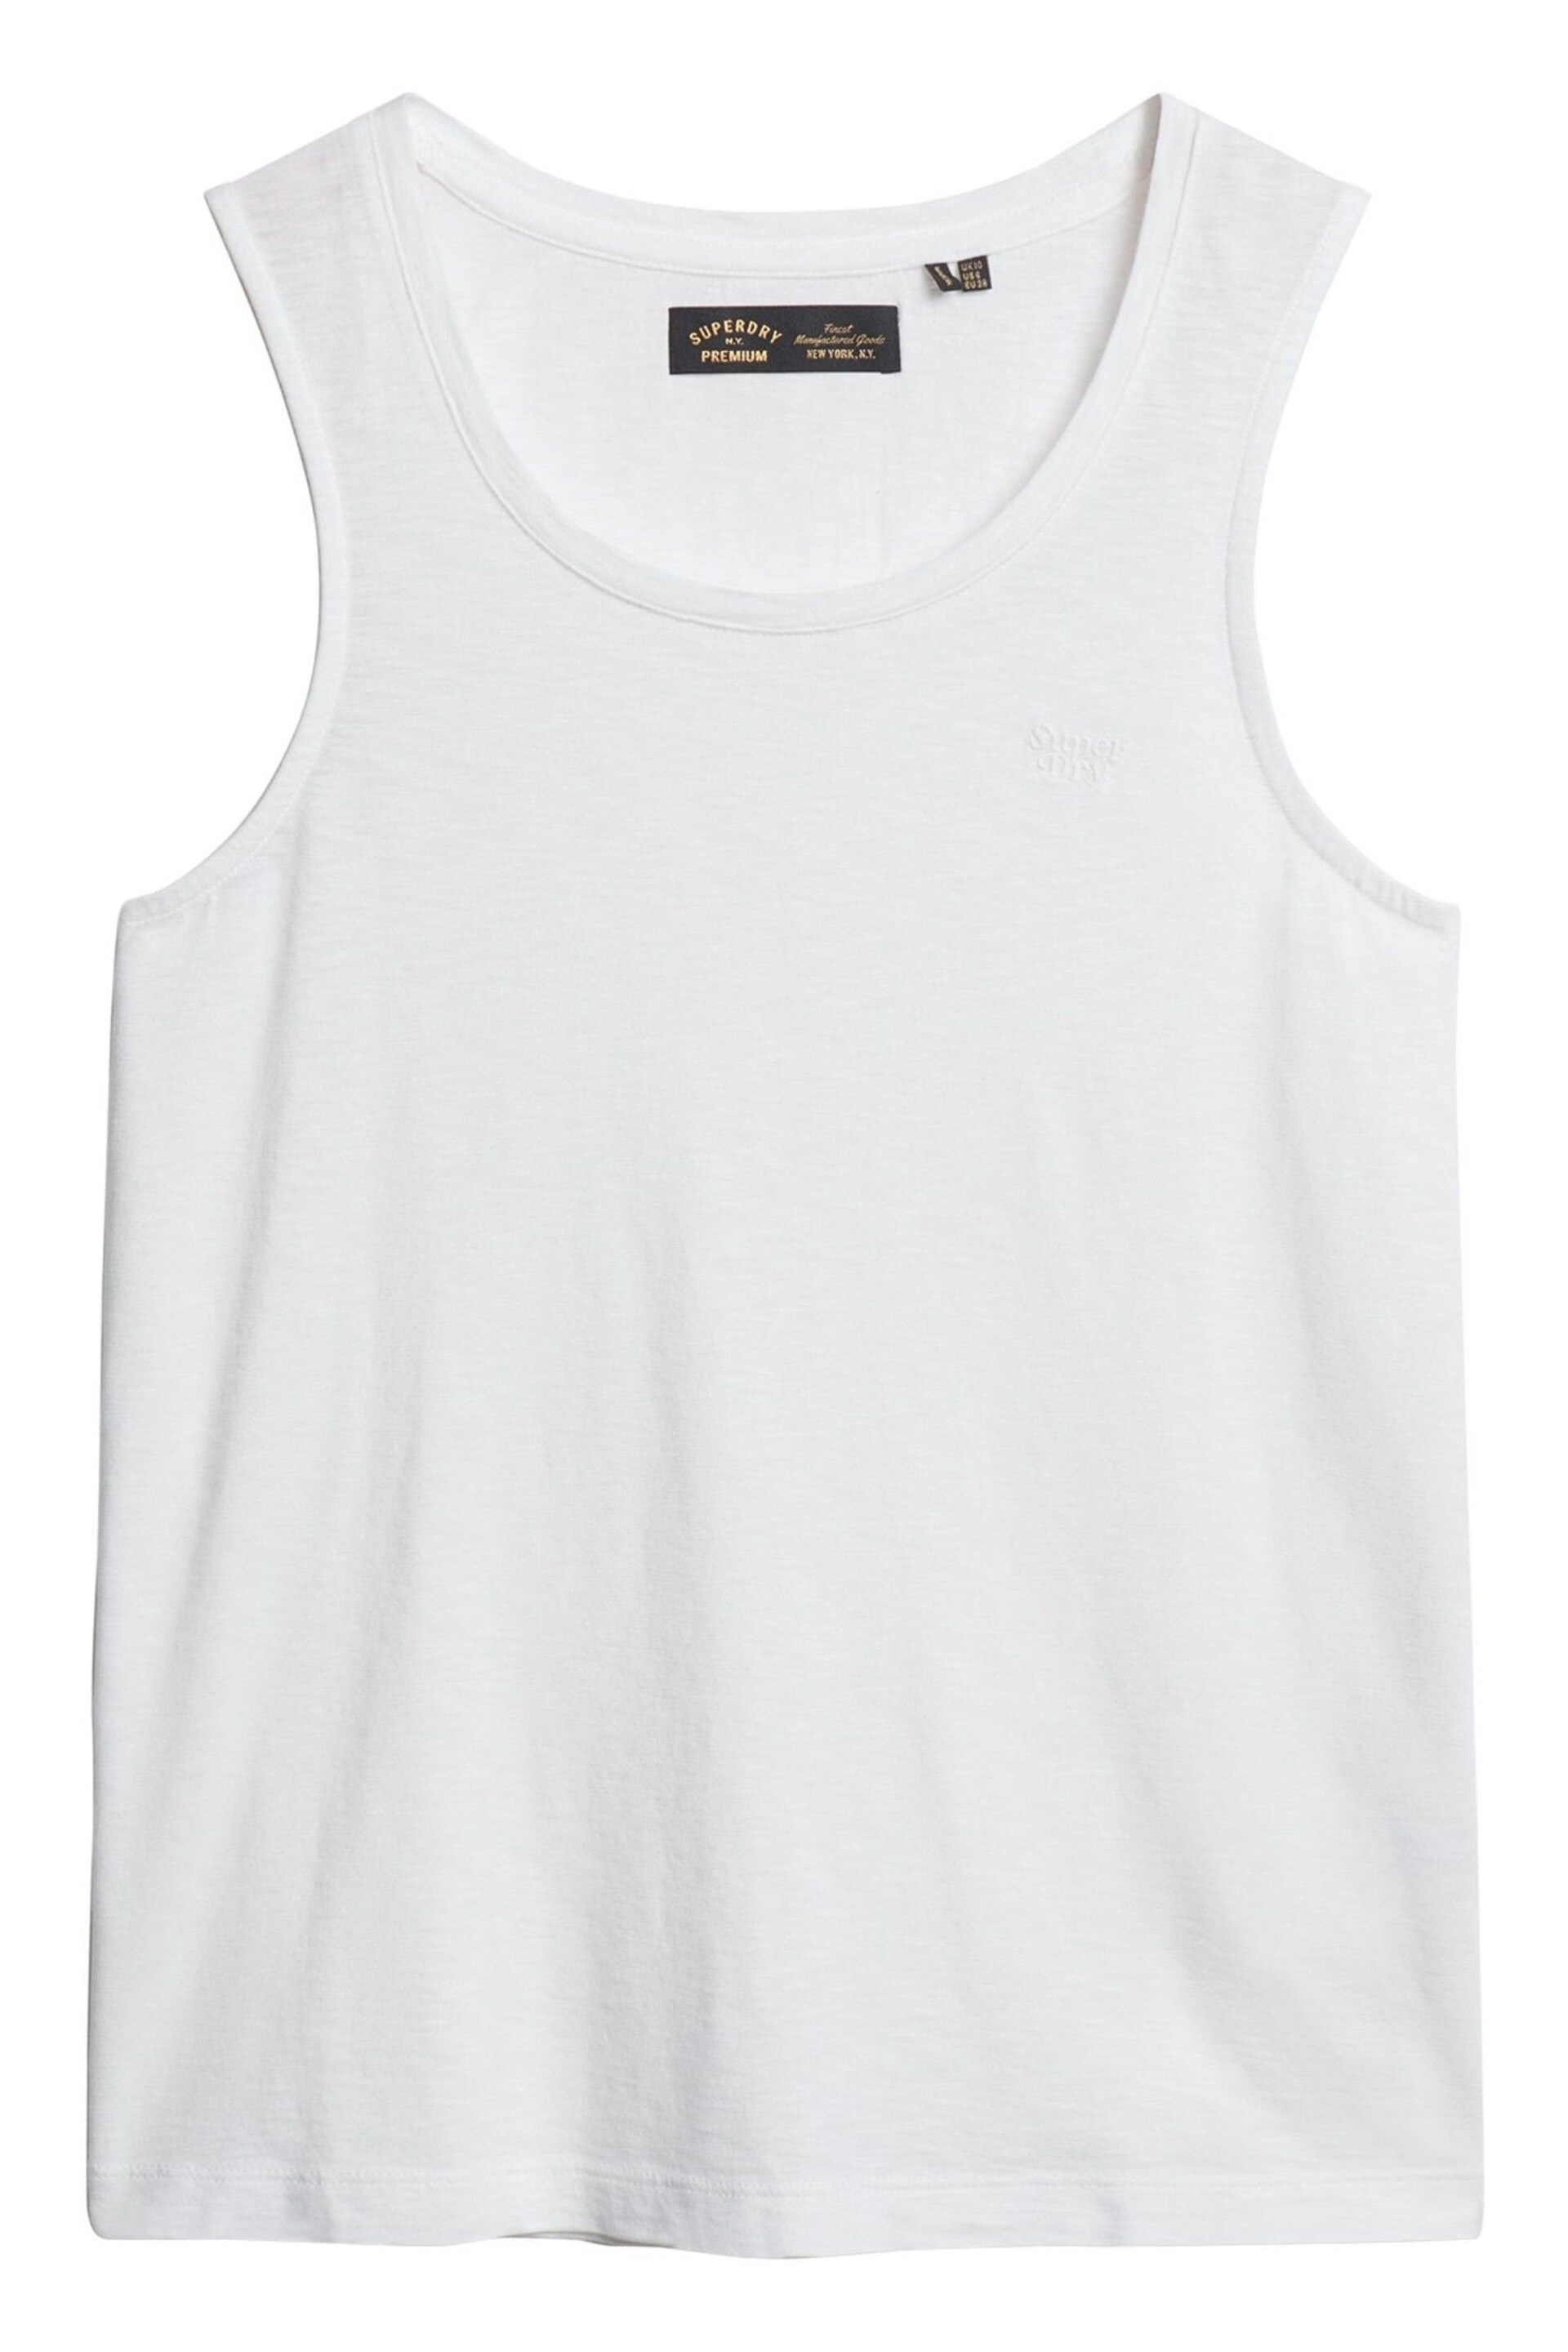 Superdry White Scoop Neck Tank - Image 4 of 5